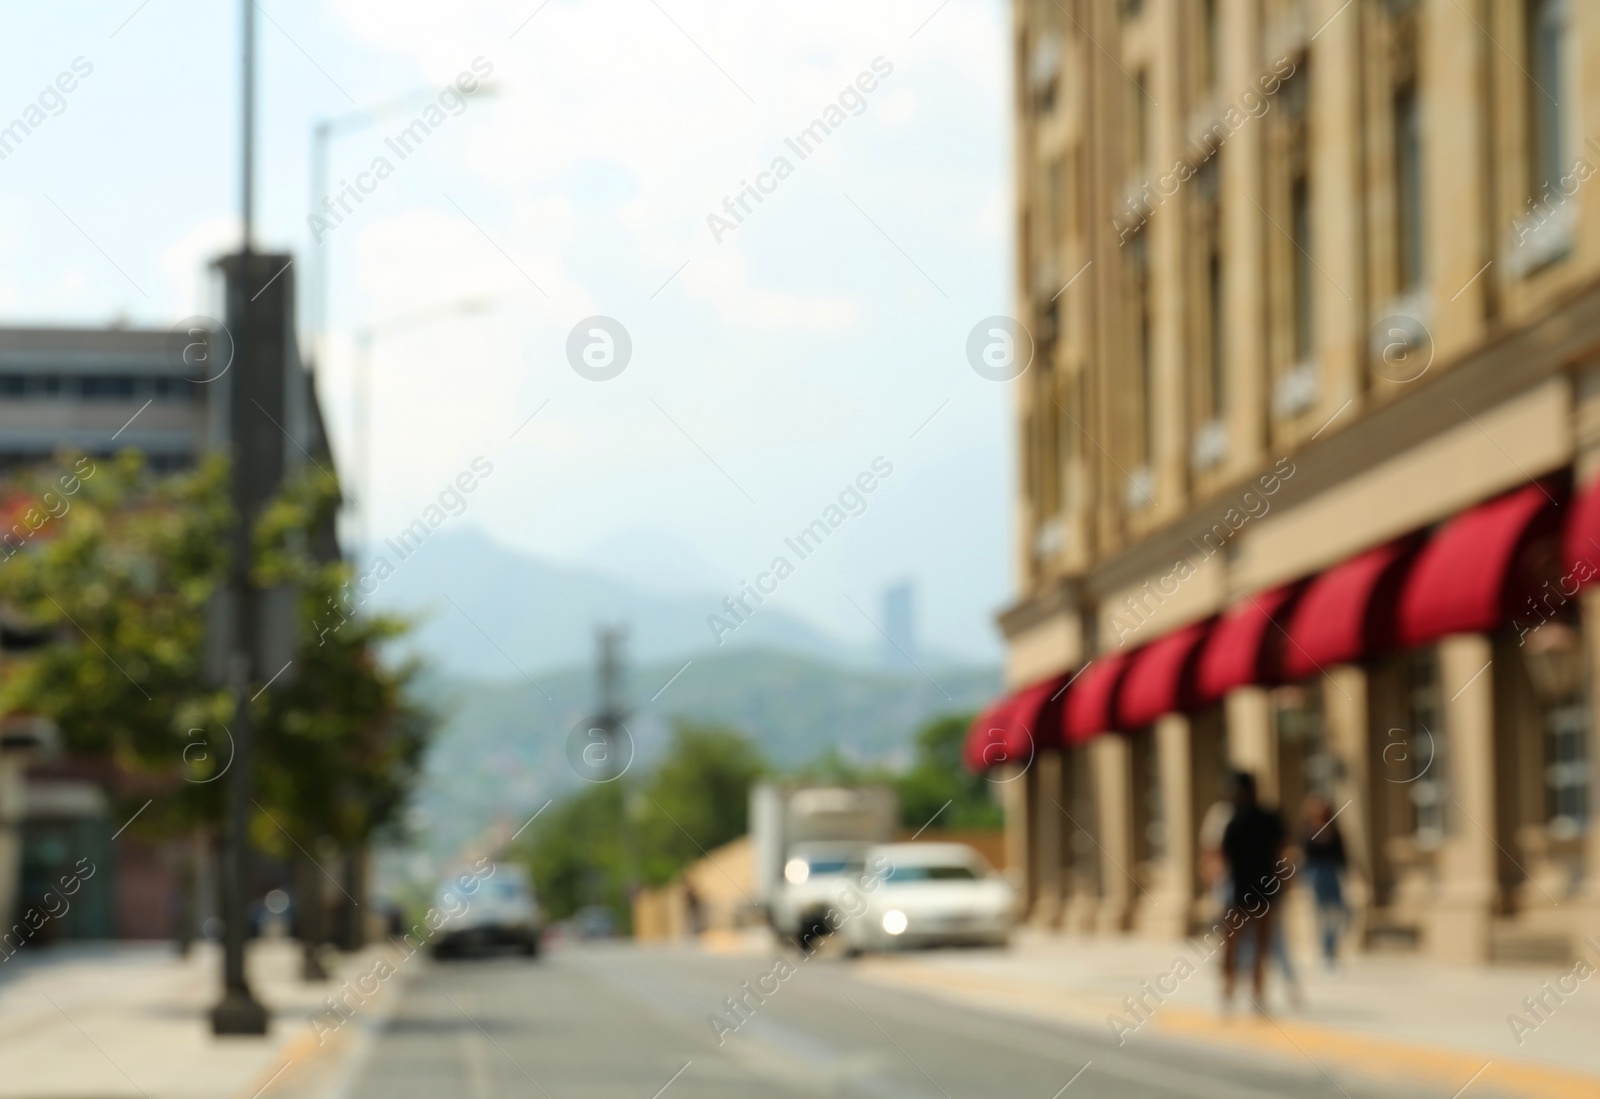 Photo of Blurred view of city street with buildings and parked cars